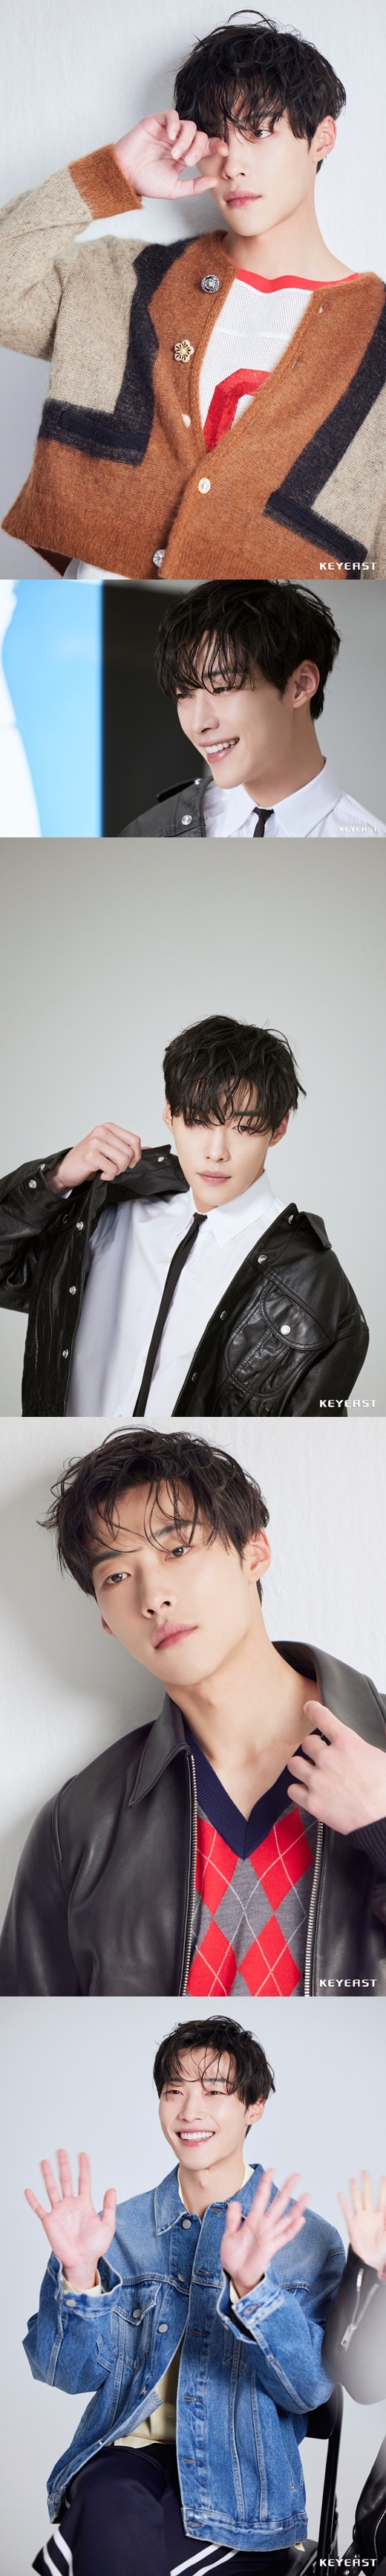 Actor Woo Do-hwan exuded irreplaceable charm.Keith, the agencys chief executive officer, unveiled Woo Do-hwans Marie Claire April pictorial behind-the-scenes cut.In the photo, Woo Do-hwan showed a unique and gentle charm toward the full-fledged photo shot camera, and when the photo shot started, he showed a relaxed pose and excellent eyes with amazing concentration.It is the back door that he got the praise of Woo Do-hwan because he was able to catch his image while enjoying the photo shot scene in a natural atmosphere like a picture artisan.In addition, Woo Do-hwan attracted attention by perfecting various fashion items.In addition, Woo Do-hwan boasted Ji Yeon Kim, who is breathing in MBC gilt drama Chosun Lawyer, and real couple Kimi.The two looked at each others balls and showed a bright smile toward the camera, creating a lovely atmosphere.Woo Do-hwan and Ji Yeon Kim showed a professional aspect, but during the break, they exchanged pleasant jokes and led the atmosphere of the photo shoot.Woo Do-hwan came back to the house theater in three years as a real Lawyer strong water role for the people in Chosun Lawyer. Chosun Lawyer is broadcast every Friday and Saturday at 9:50 pm.